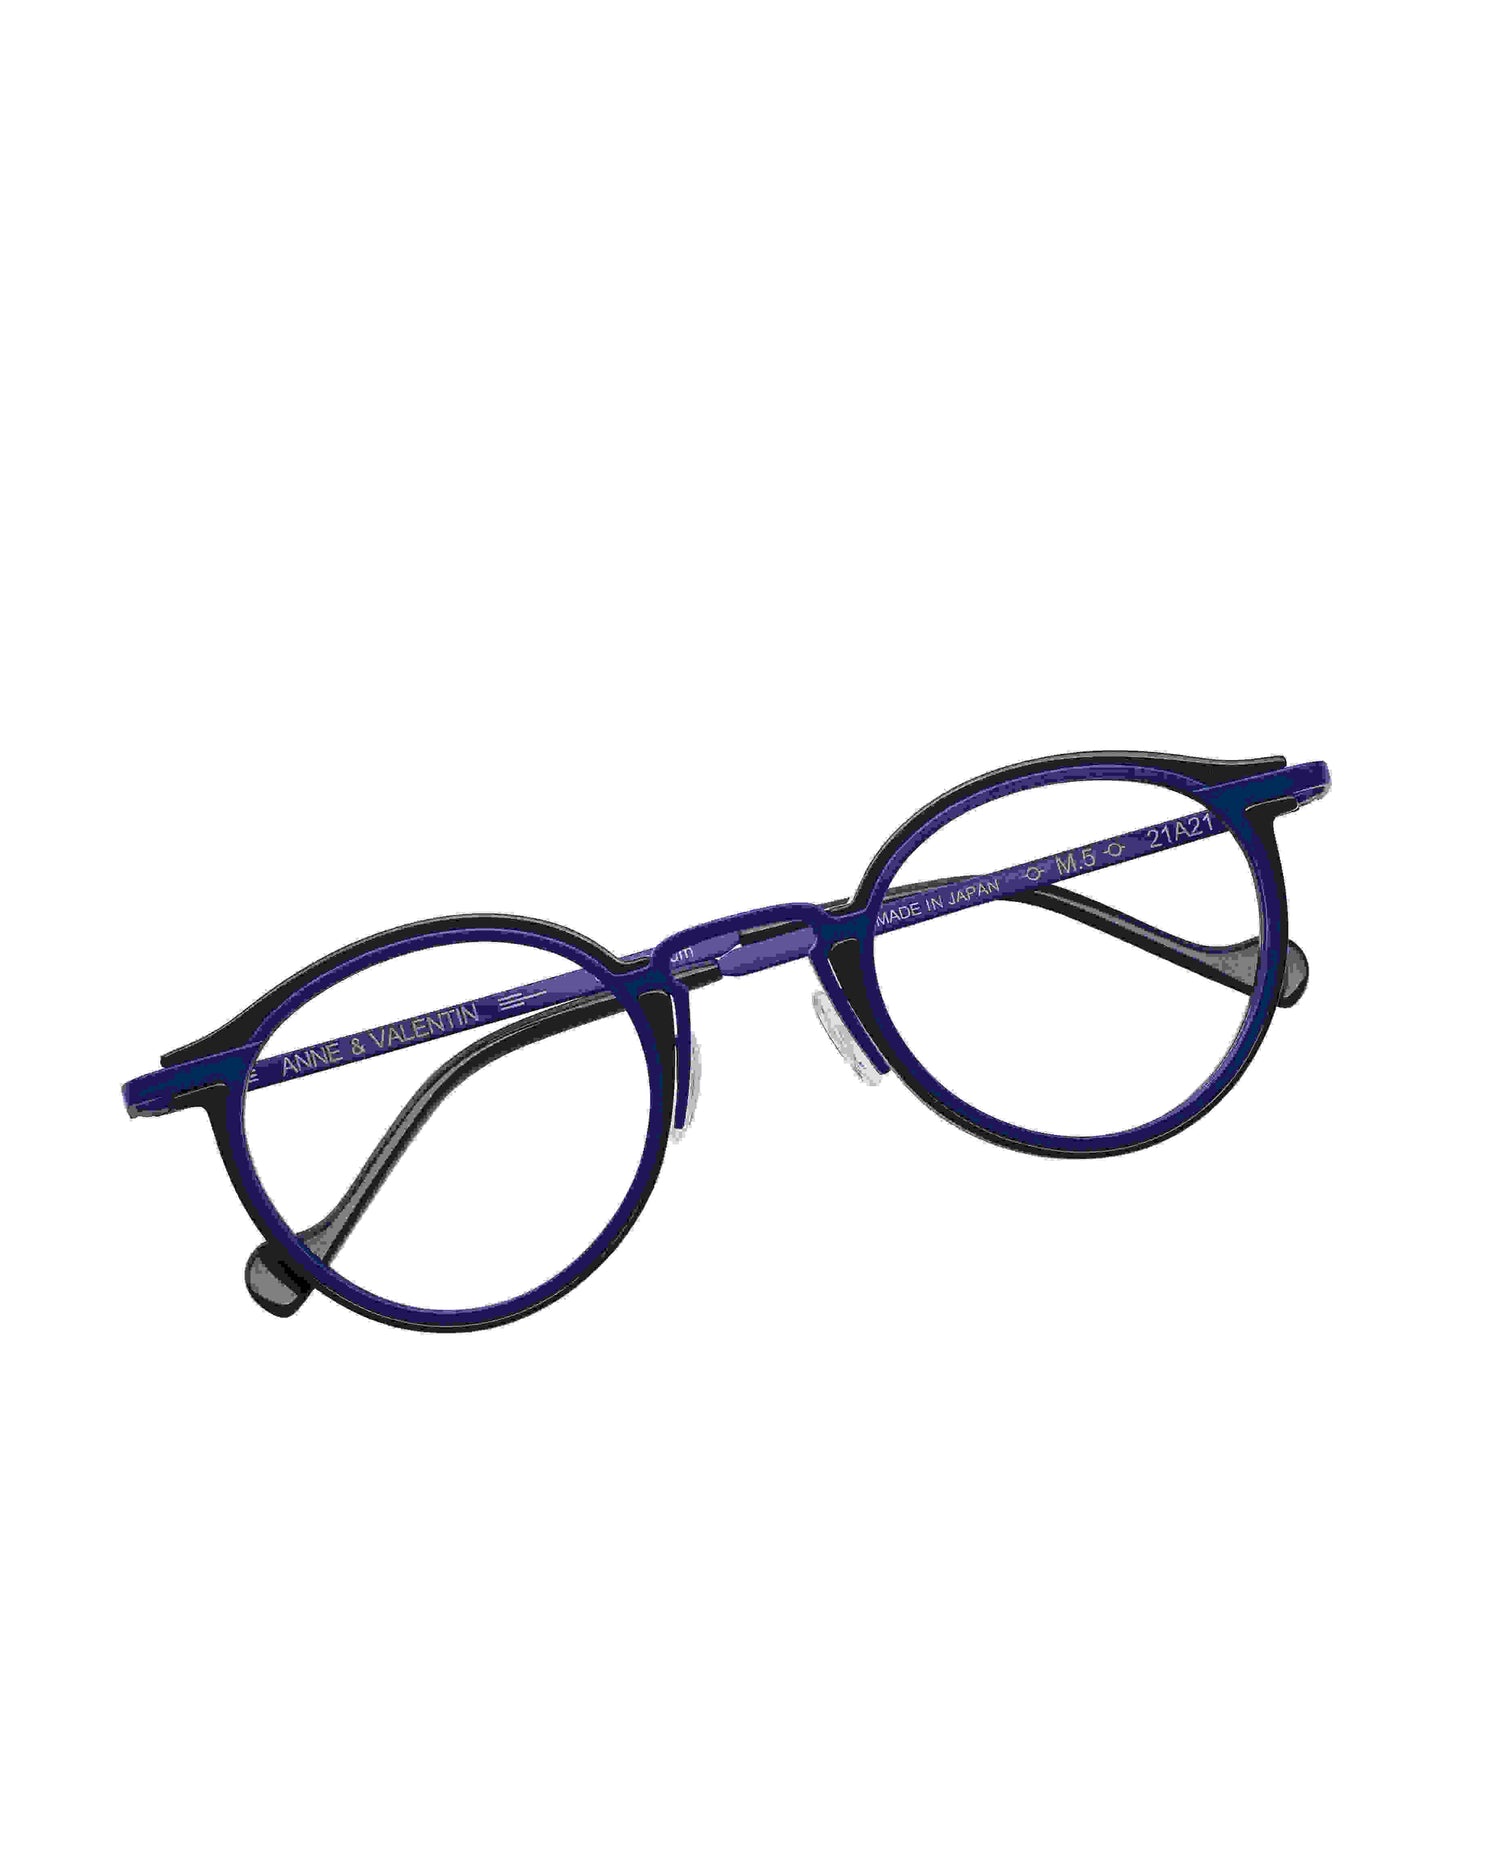 Anne and Valentin - M5 - 21A21 | glasses bar:  Marie-Sophie Dion